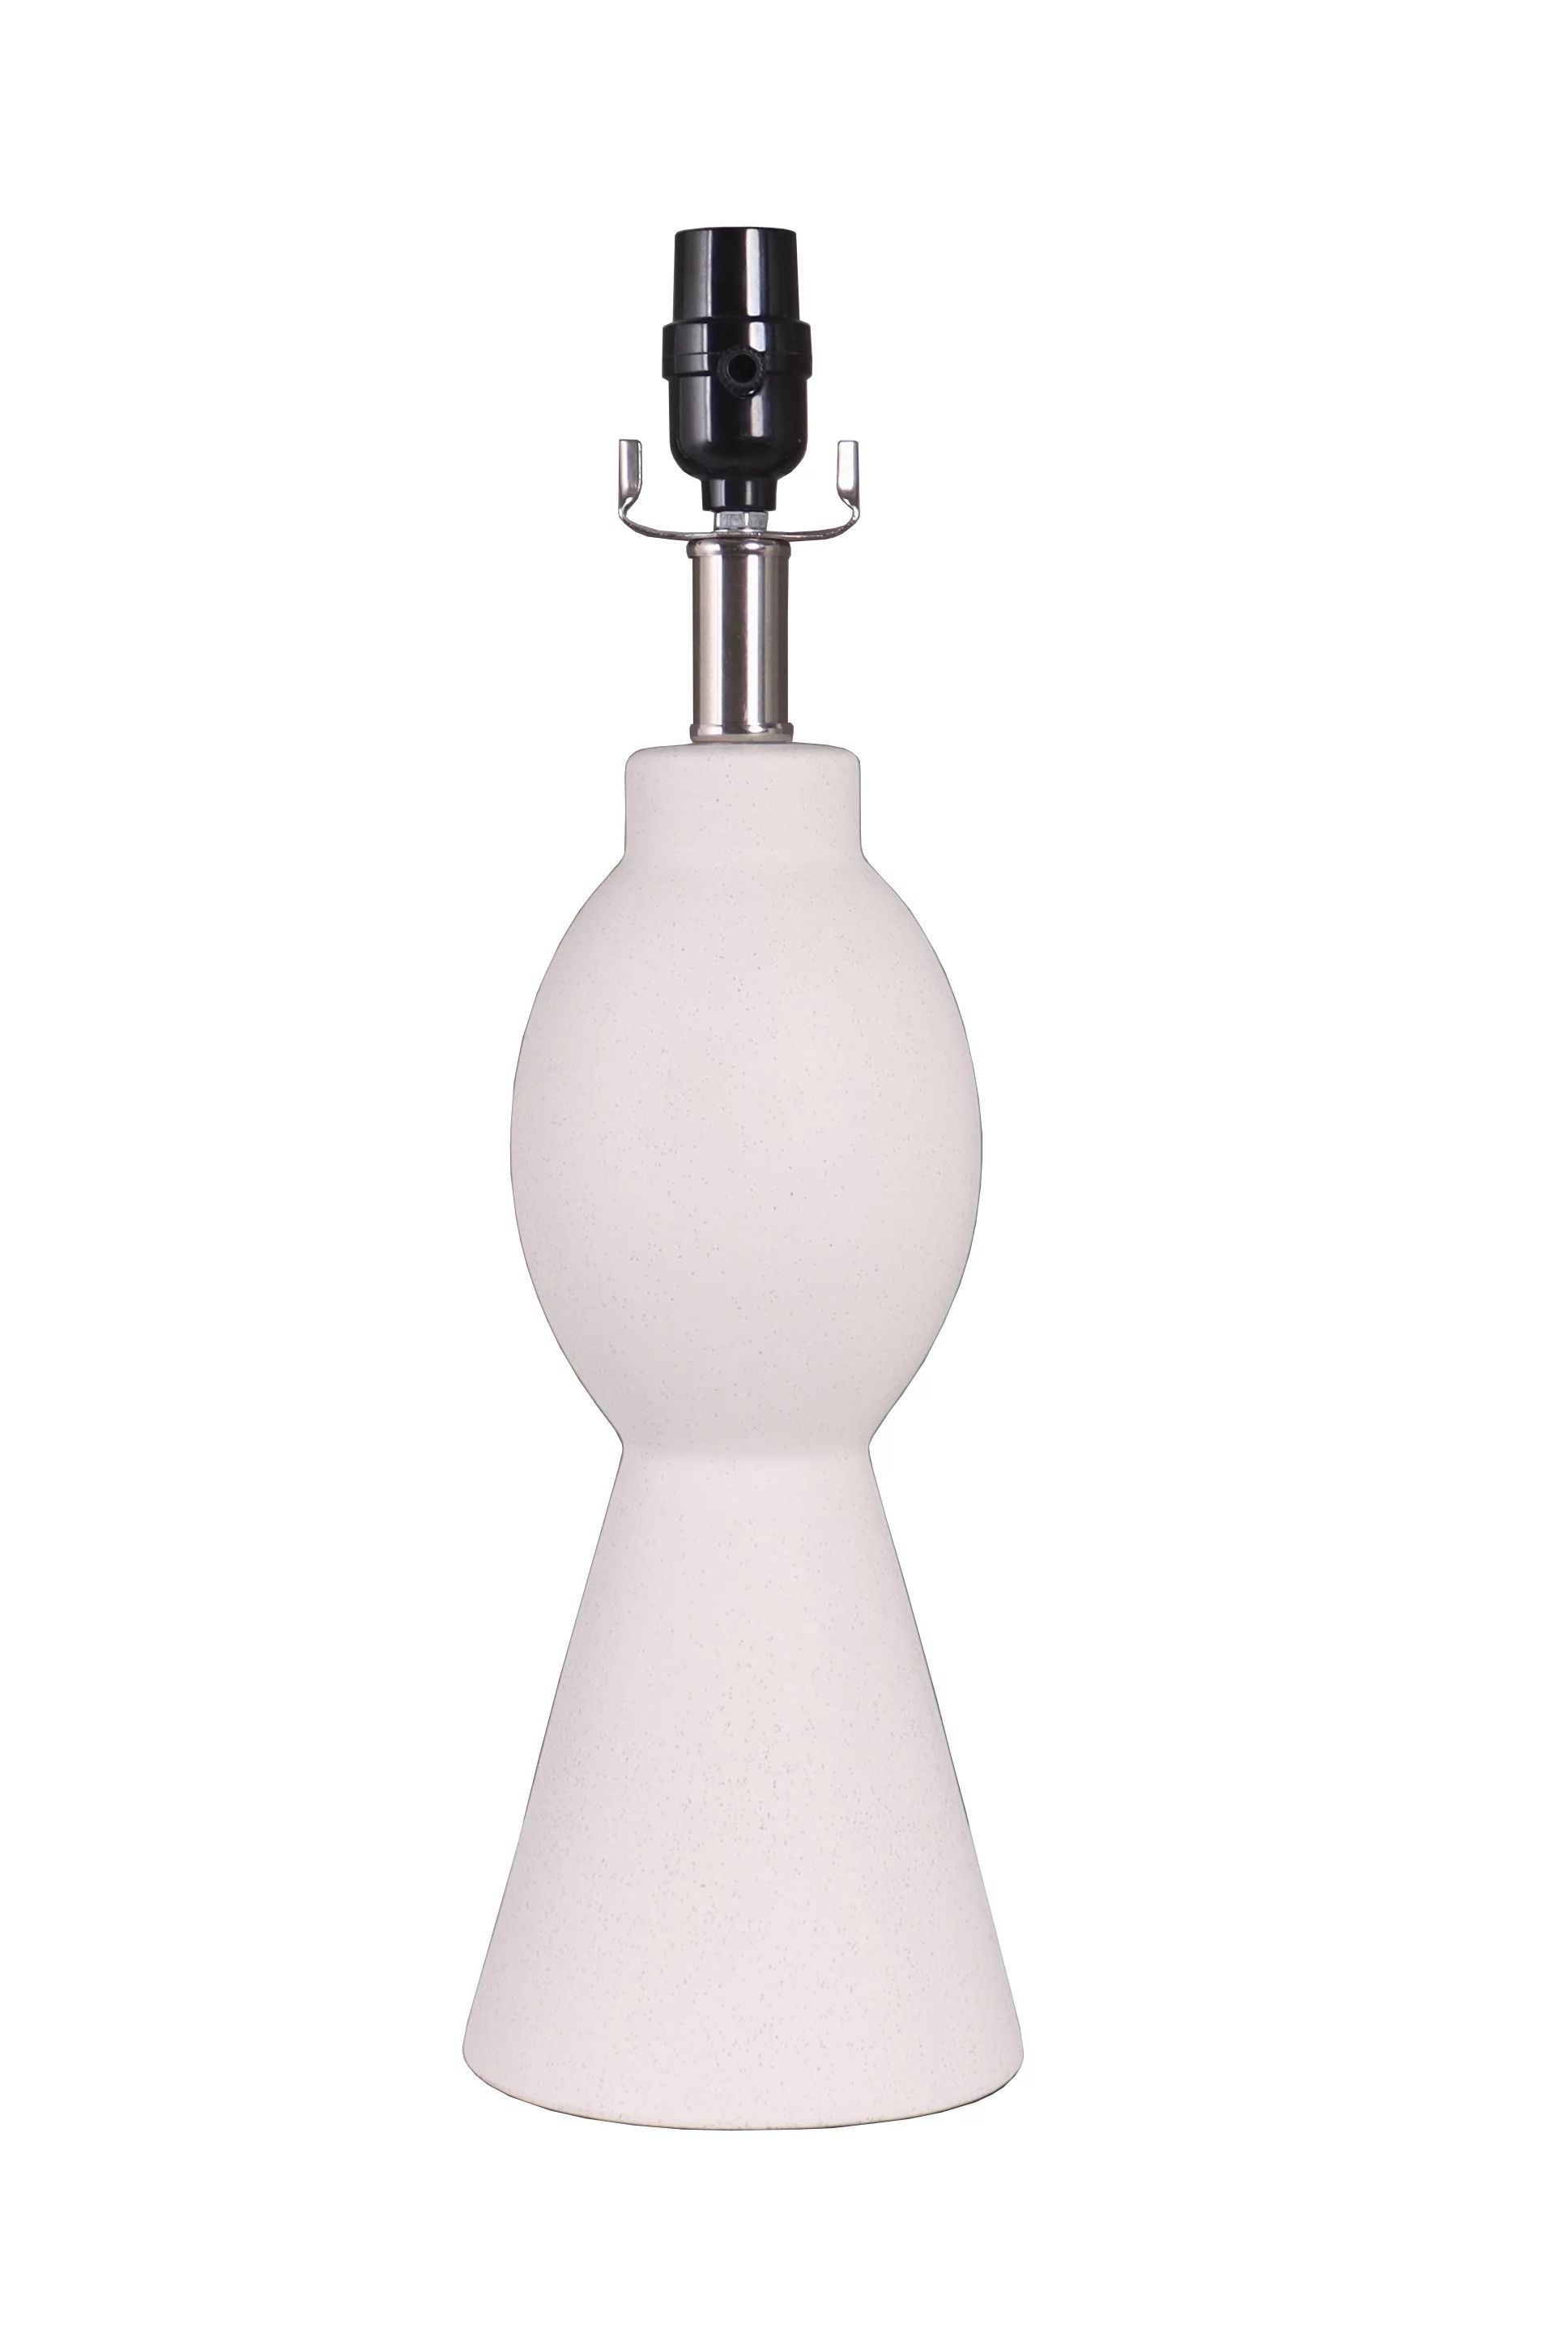 Simplee Adesso White Ceramic Modern Table Lamp Base, 18.5"H, Adult Office Use | Walmart (US)